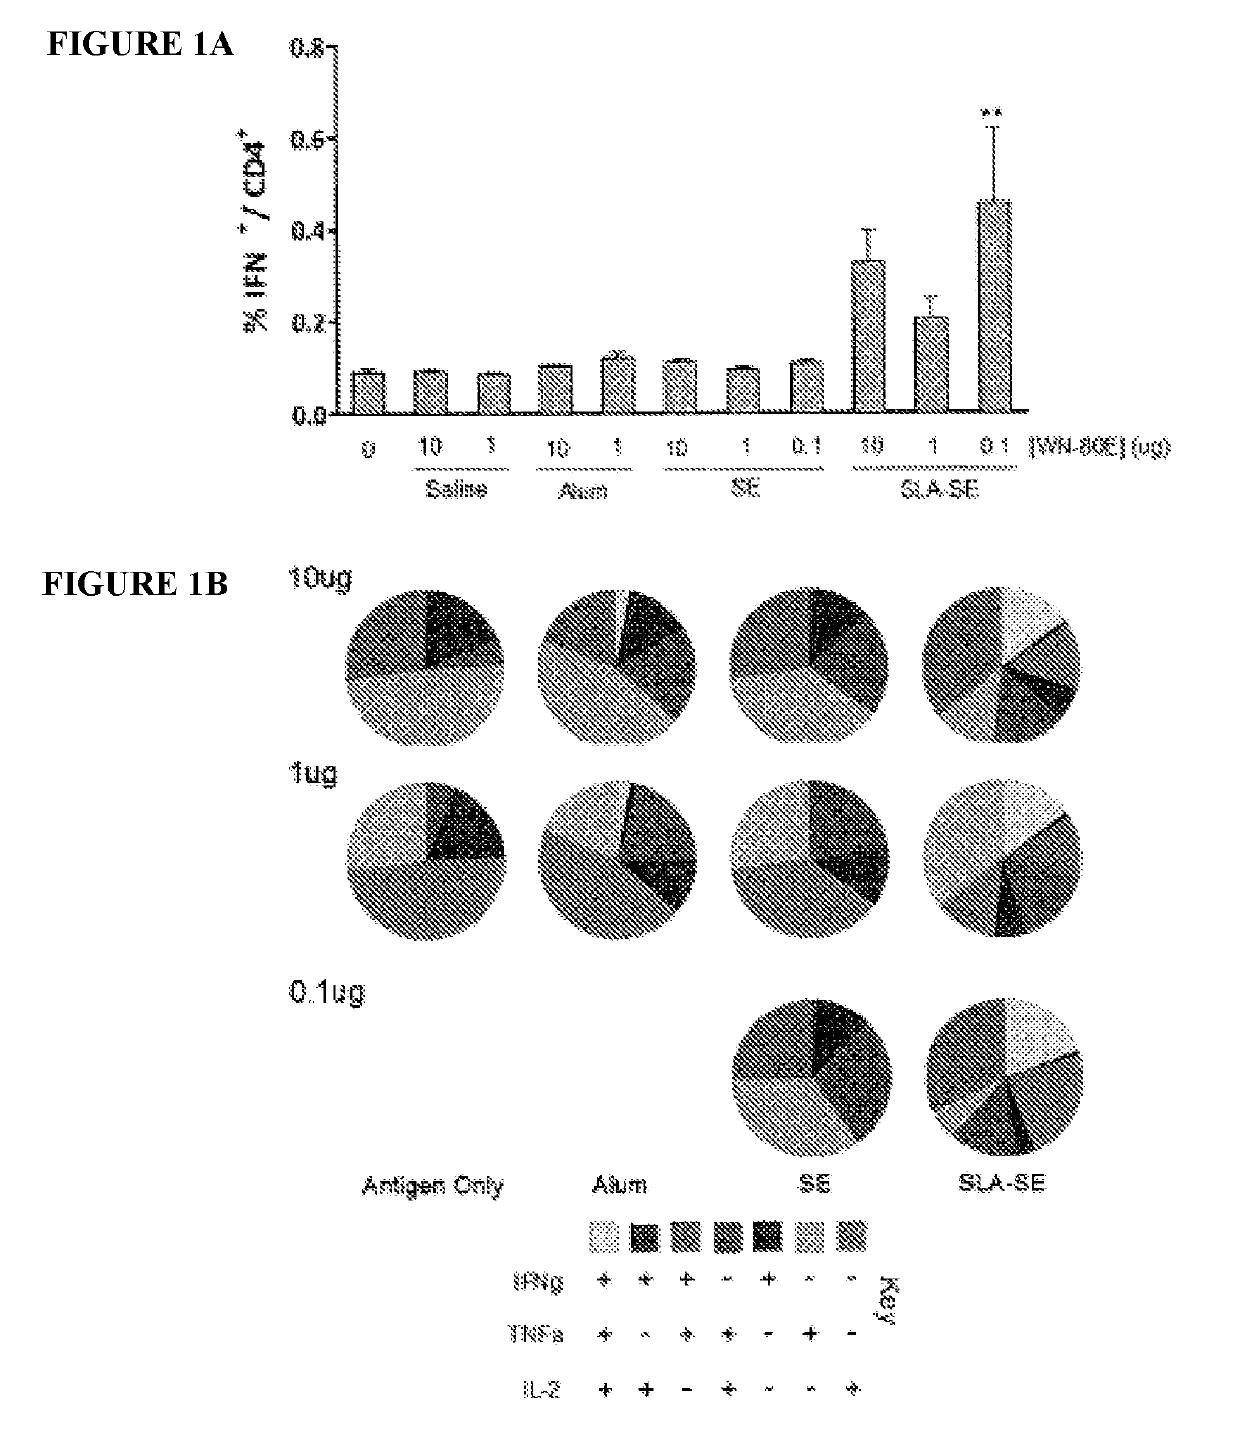 West nile virus vaccine and method of use thereof